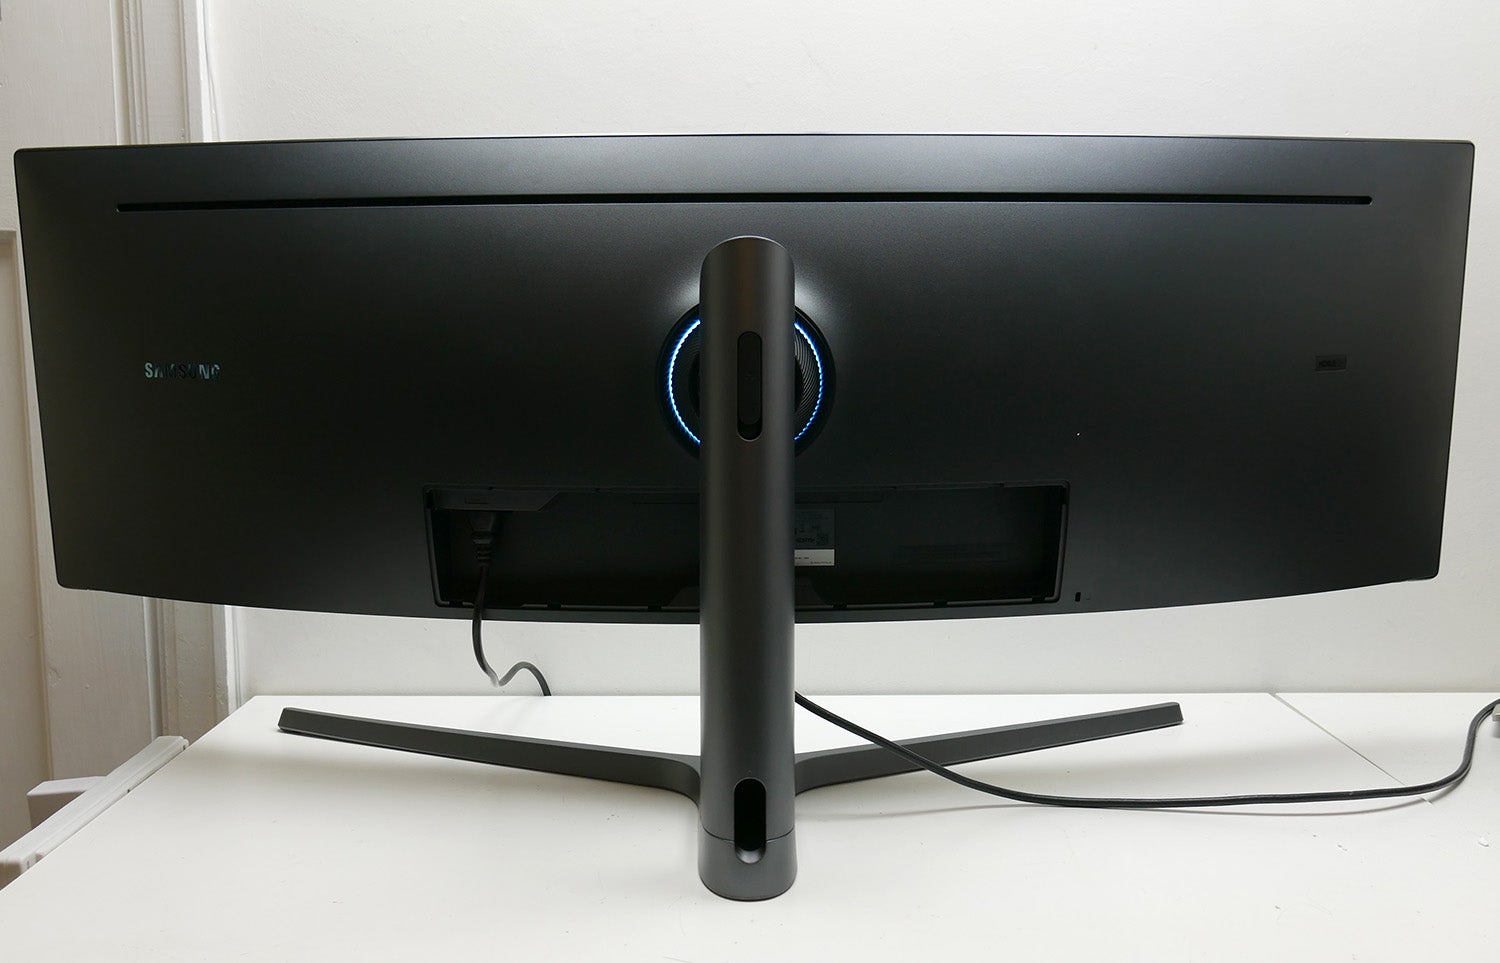 Samsung CHG90 monitor from the back showing stand and ports.